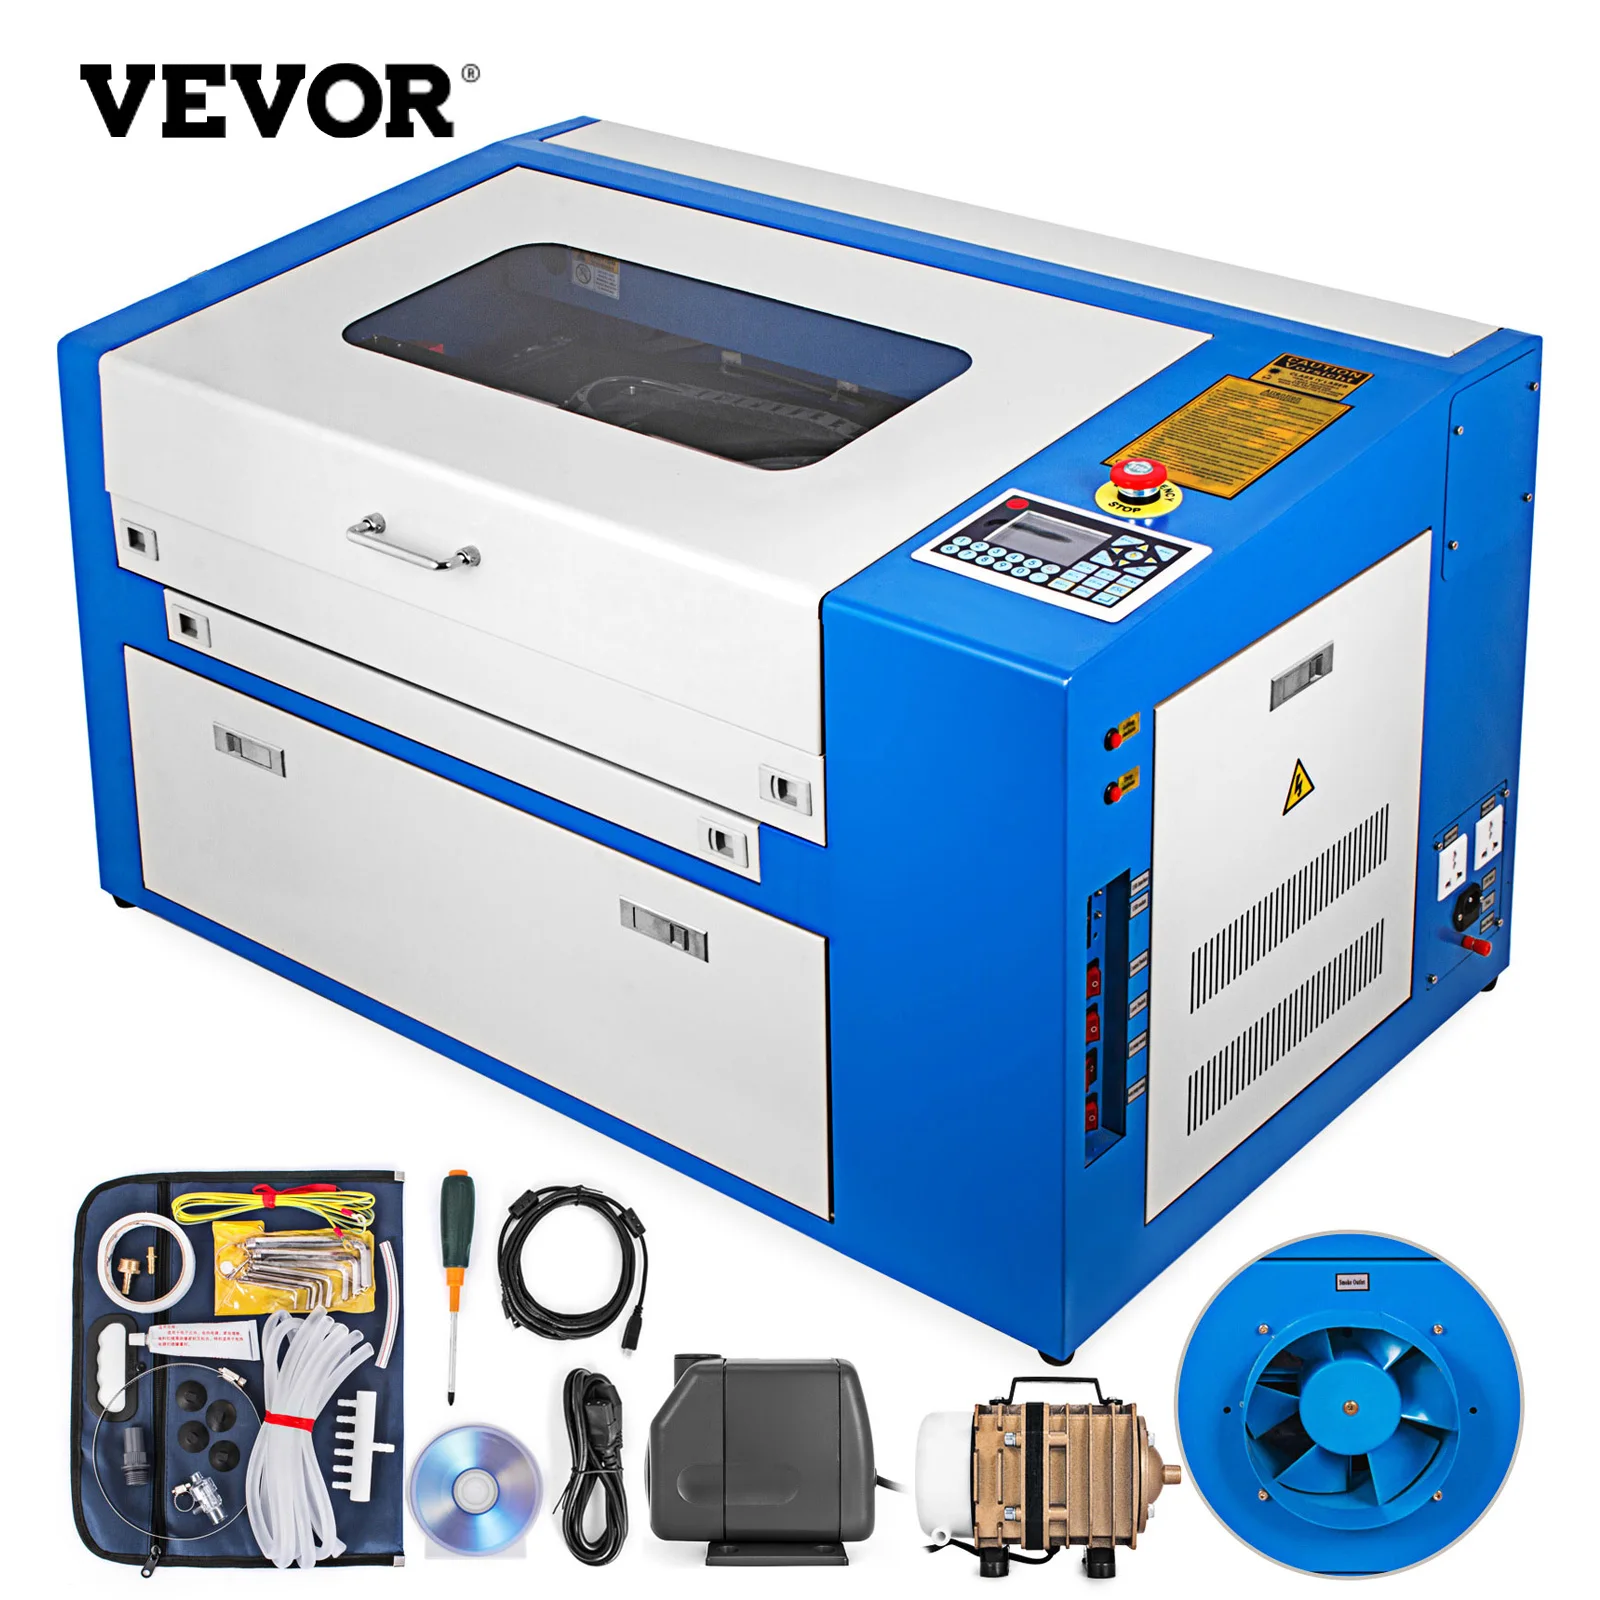 

VEVOR 50W Laser Engraver CO2 Laser Tube Cutting Machine USB Port CNC Router Cutter Specifical for Plywood/Acrylic/Wood/Leather